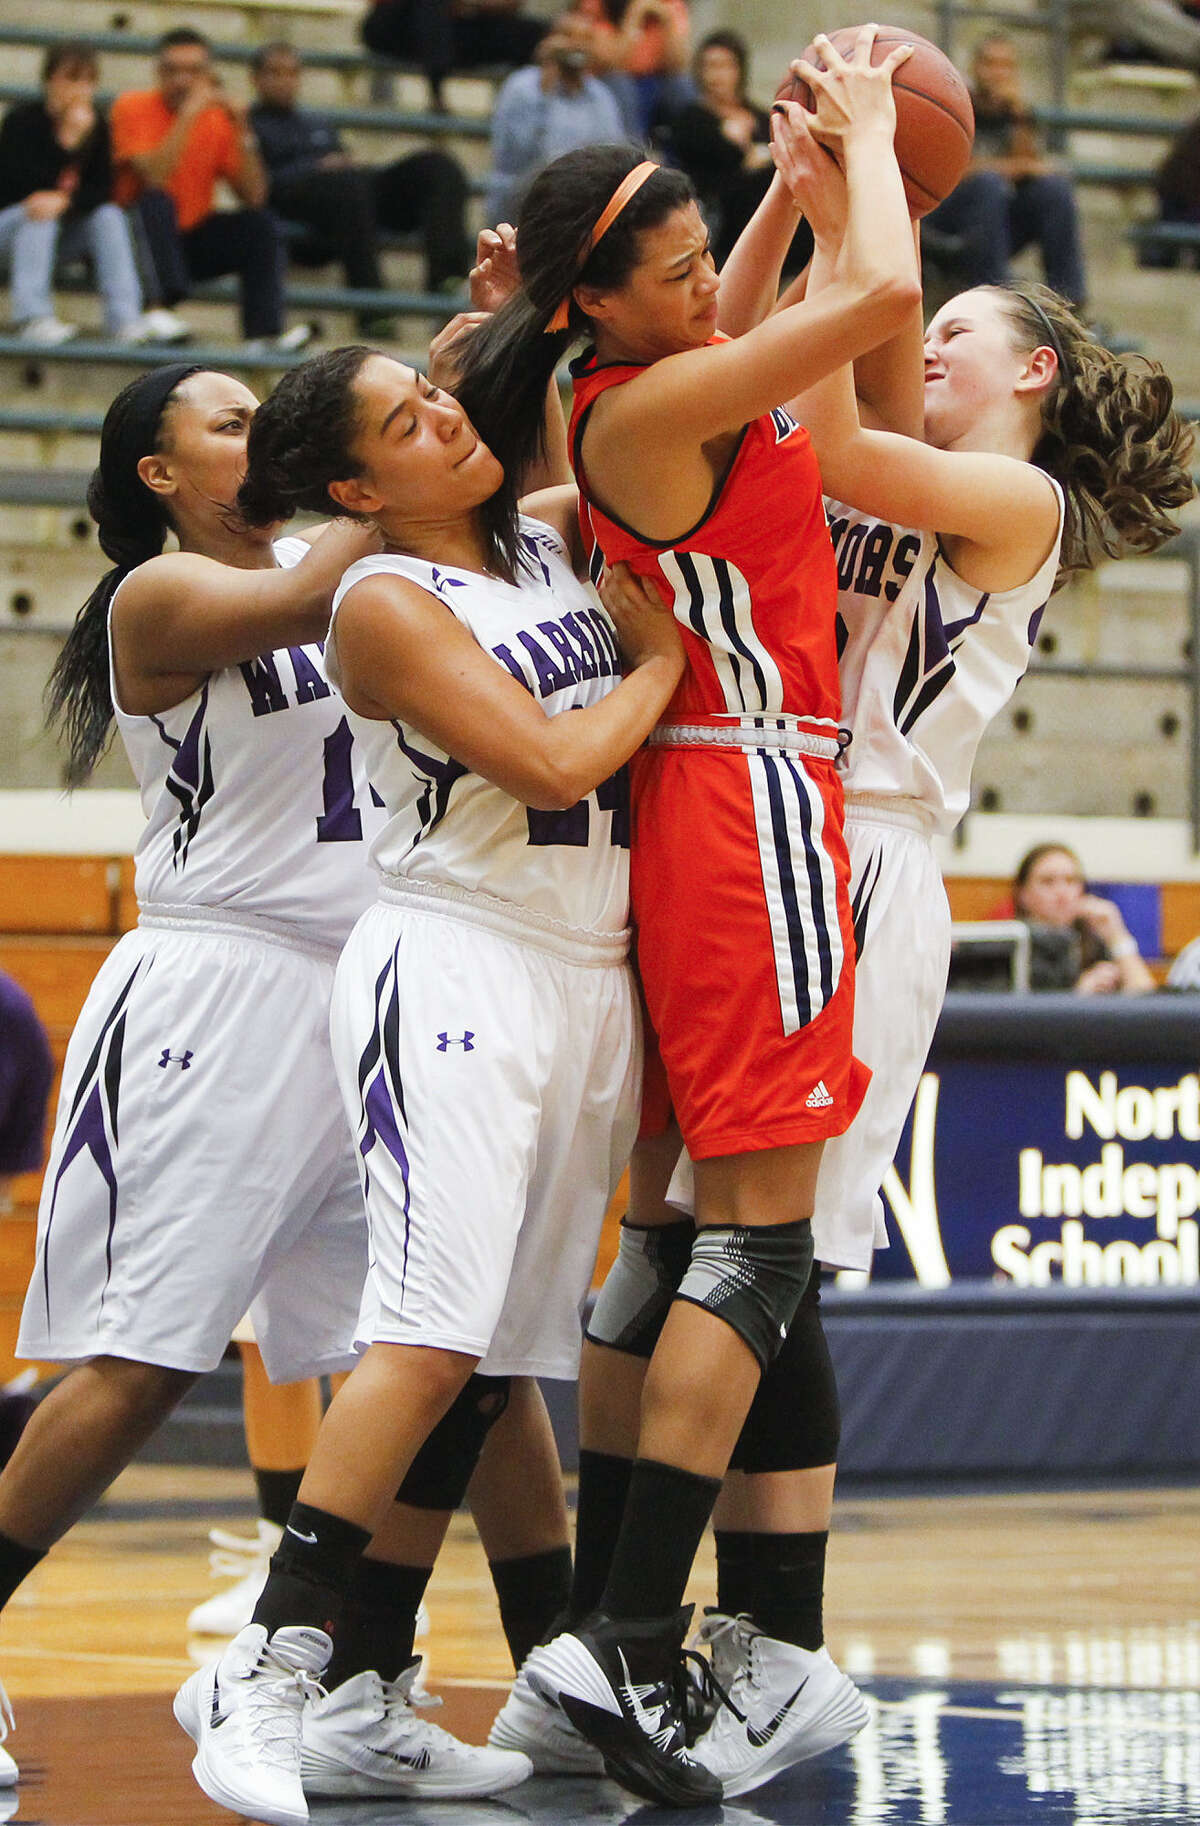 Brandeis' Morgan Williams, second from right, fights for a rebound with Warren's Adrienne Lightfoot, left, Lauryn Elliot and Victoria Hall during the first half of their Dec. 4 game.